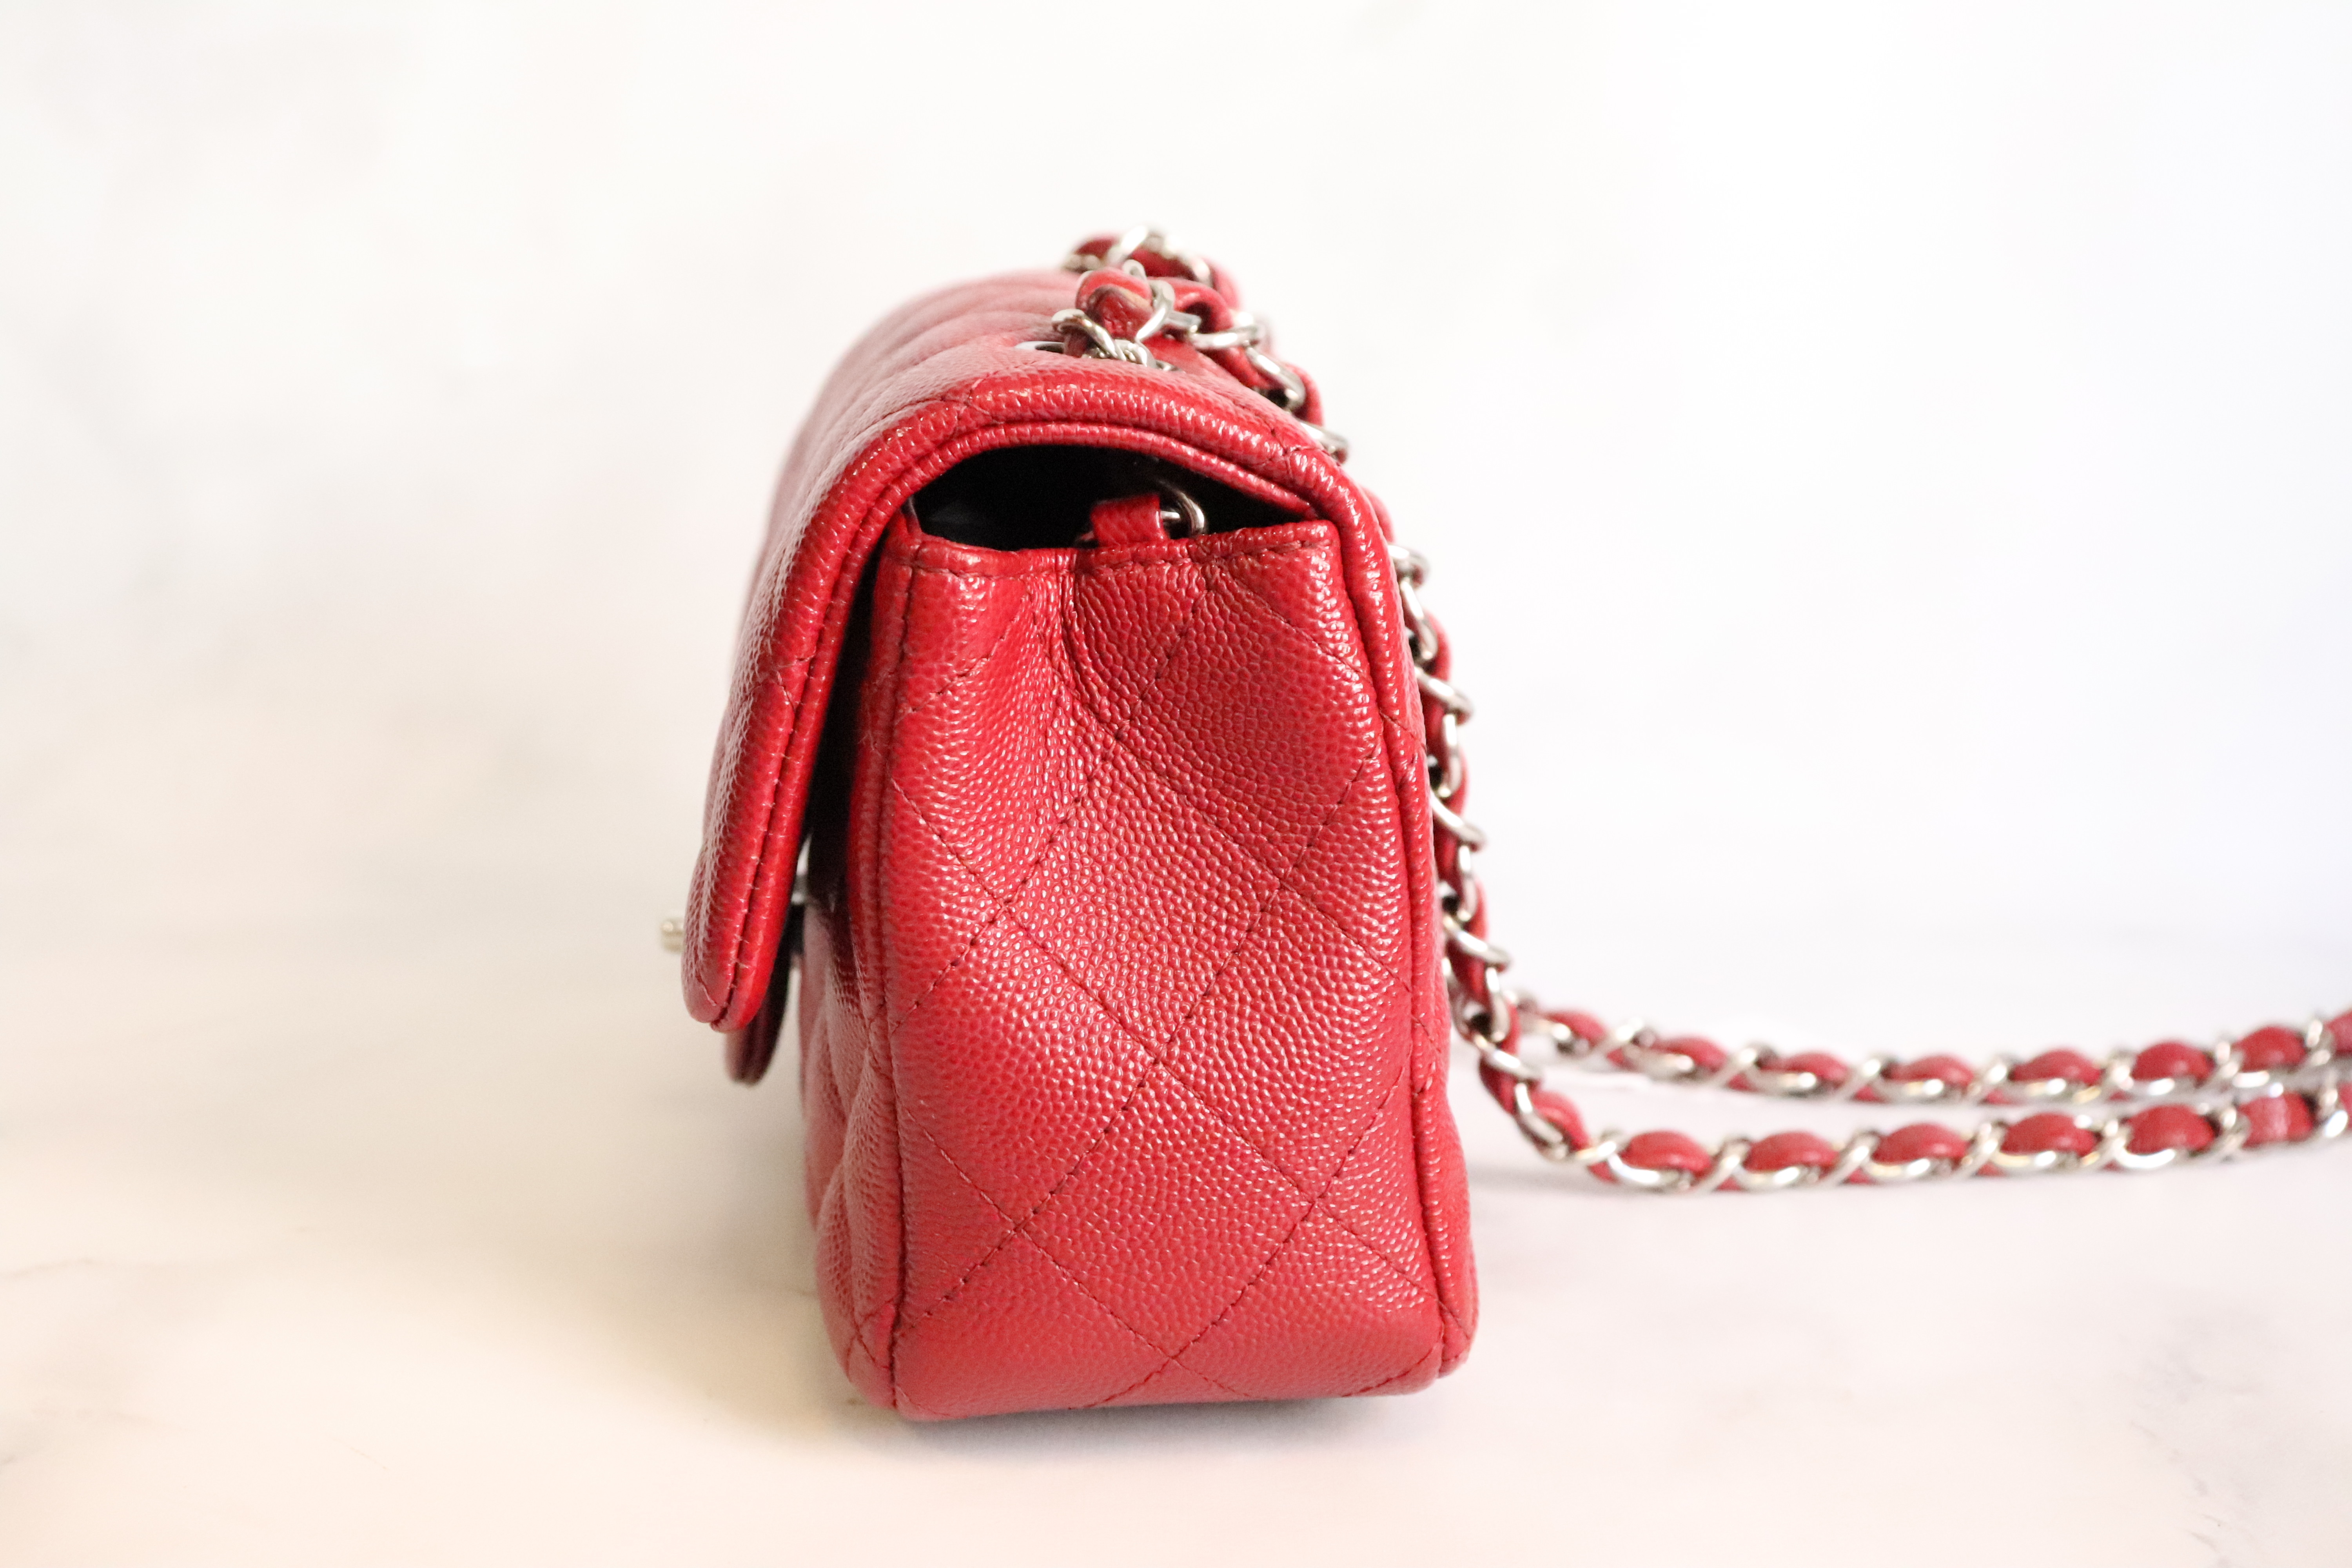 Chanel Mini Rectangle, 17B Red Caviar Leather with Silver Hardware